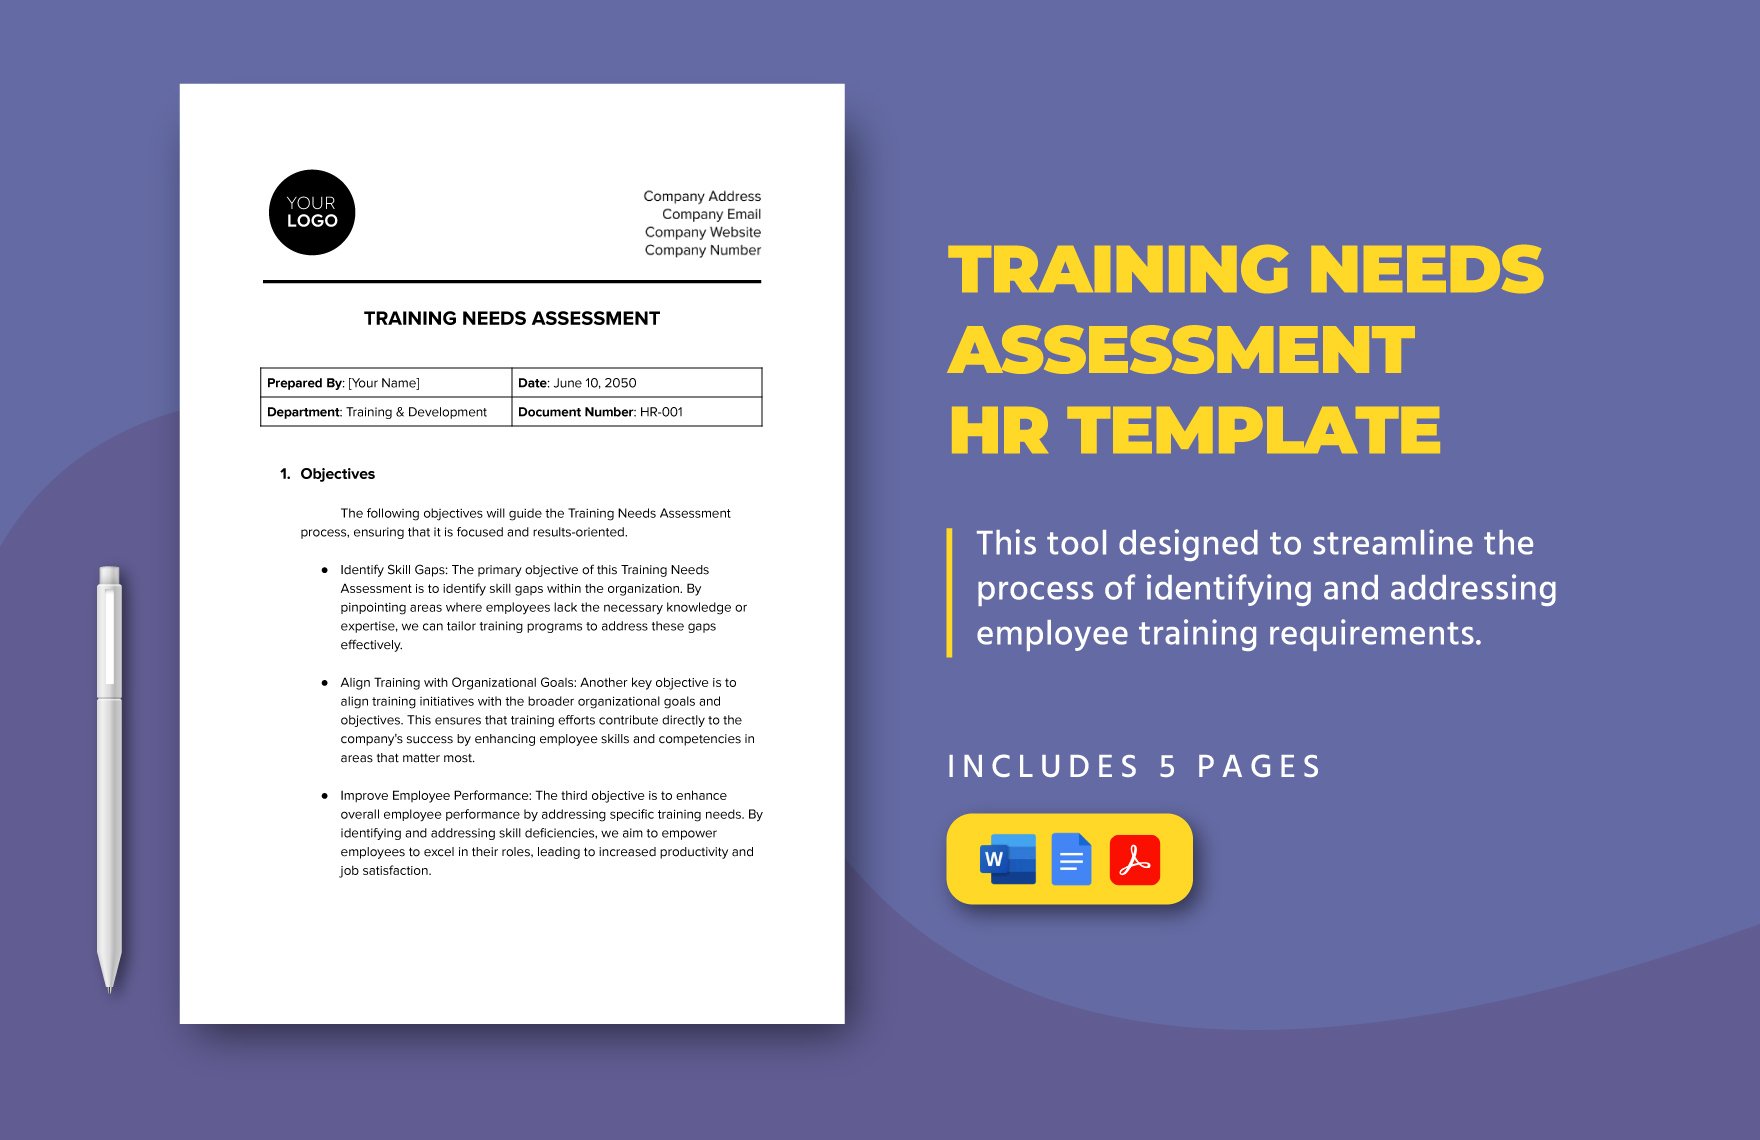 Training Needs Assessment HR Template in Word, Google Docs, PDF